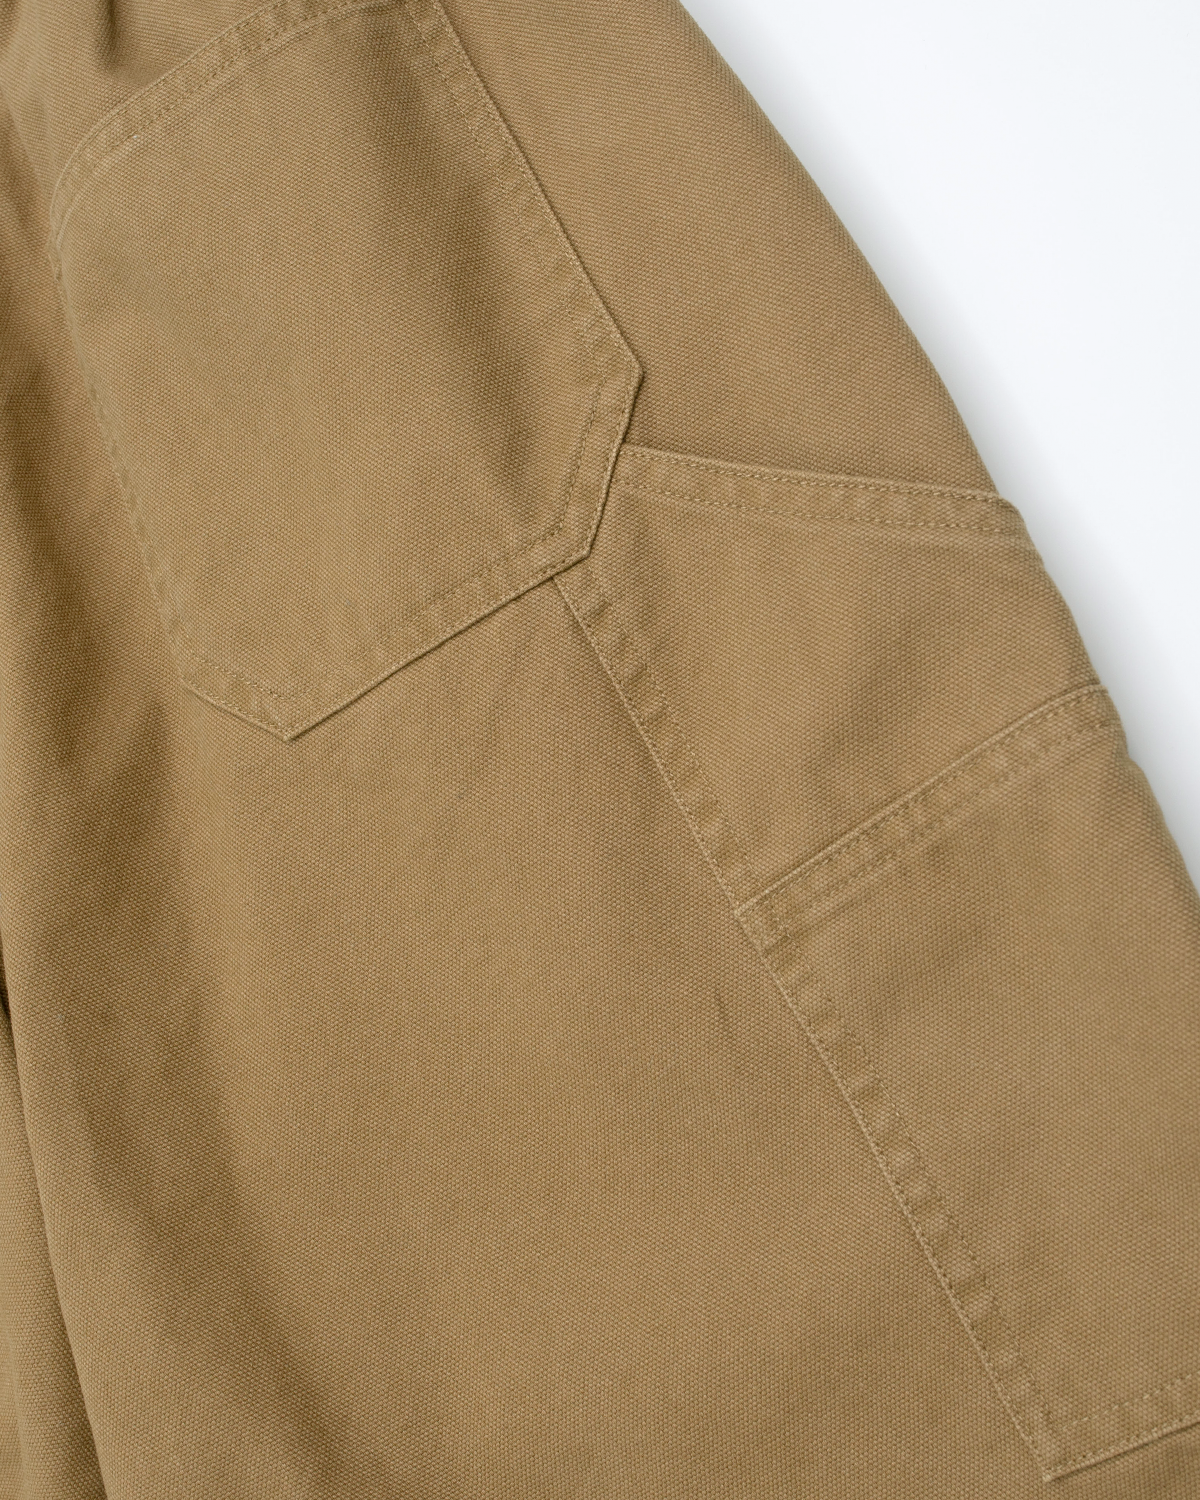 Off the label double-knee work pants brown